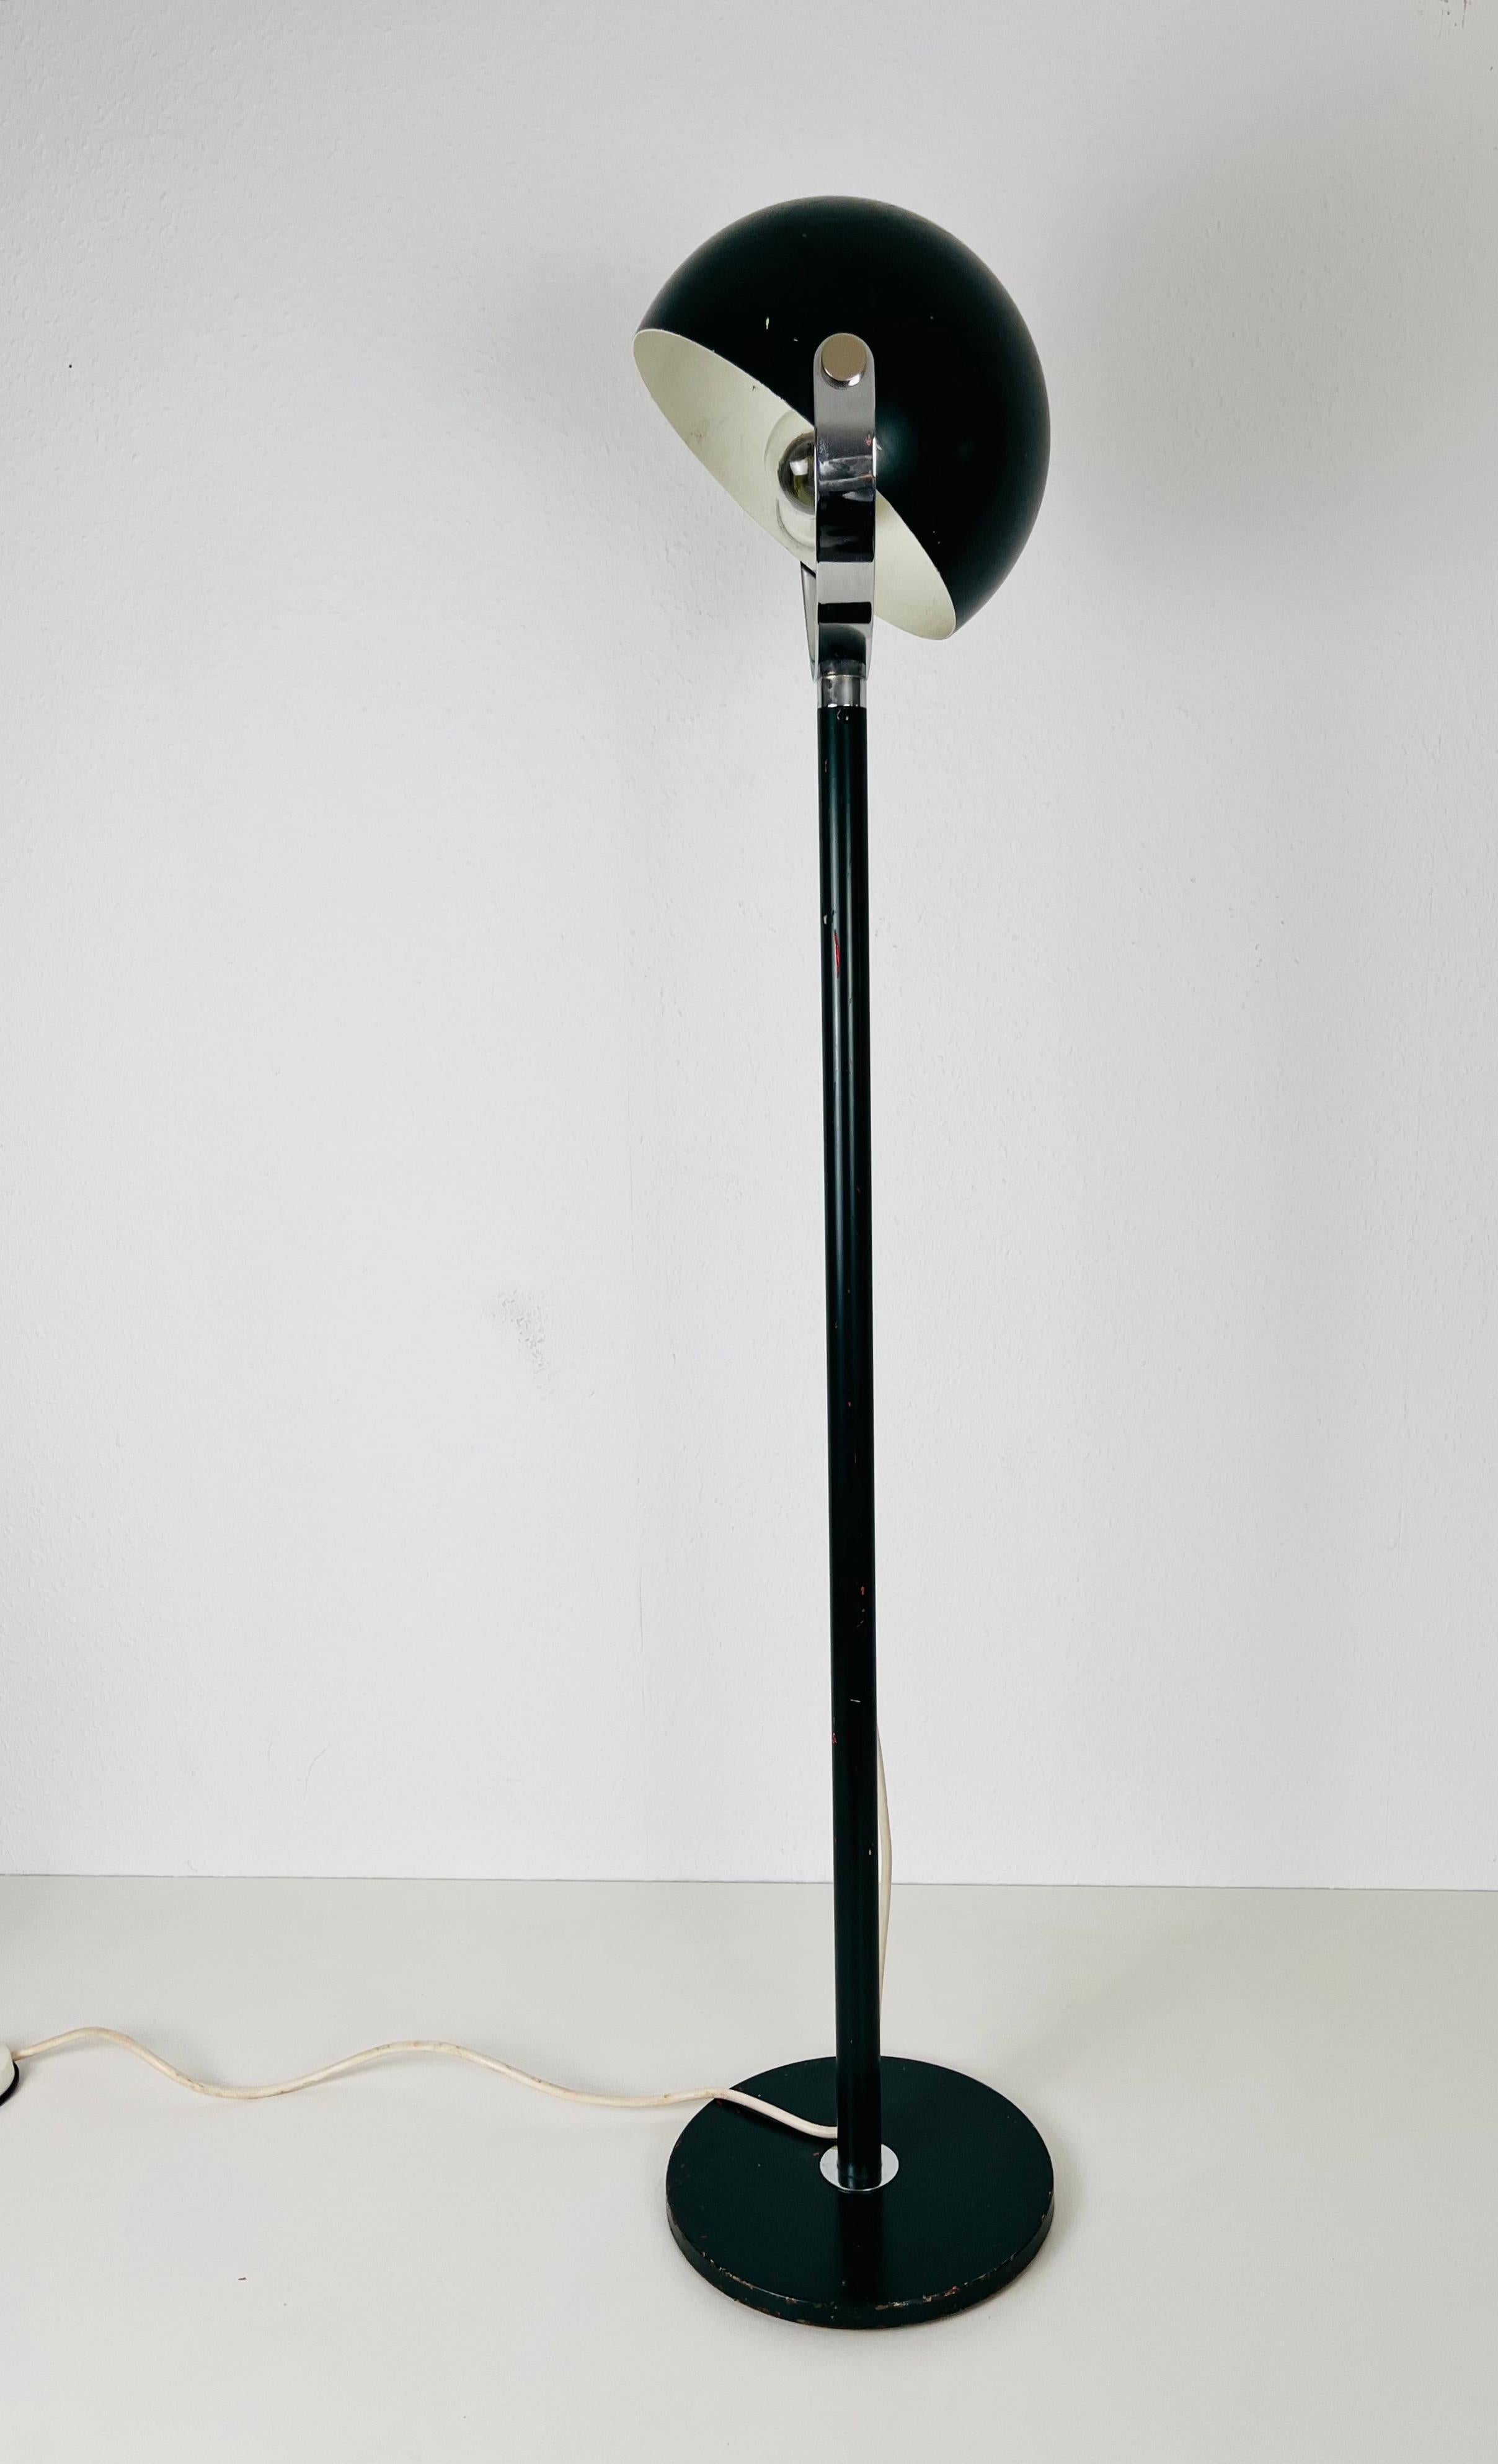 A midcentury floor lamp made in Germany in the 1960s. It is fascinating with its Space Age design and adjustable head. The bottom of the light is made of full metal.

Very good vintage condition. The lighting requires one E27 bulb. Works with both